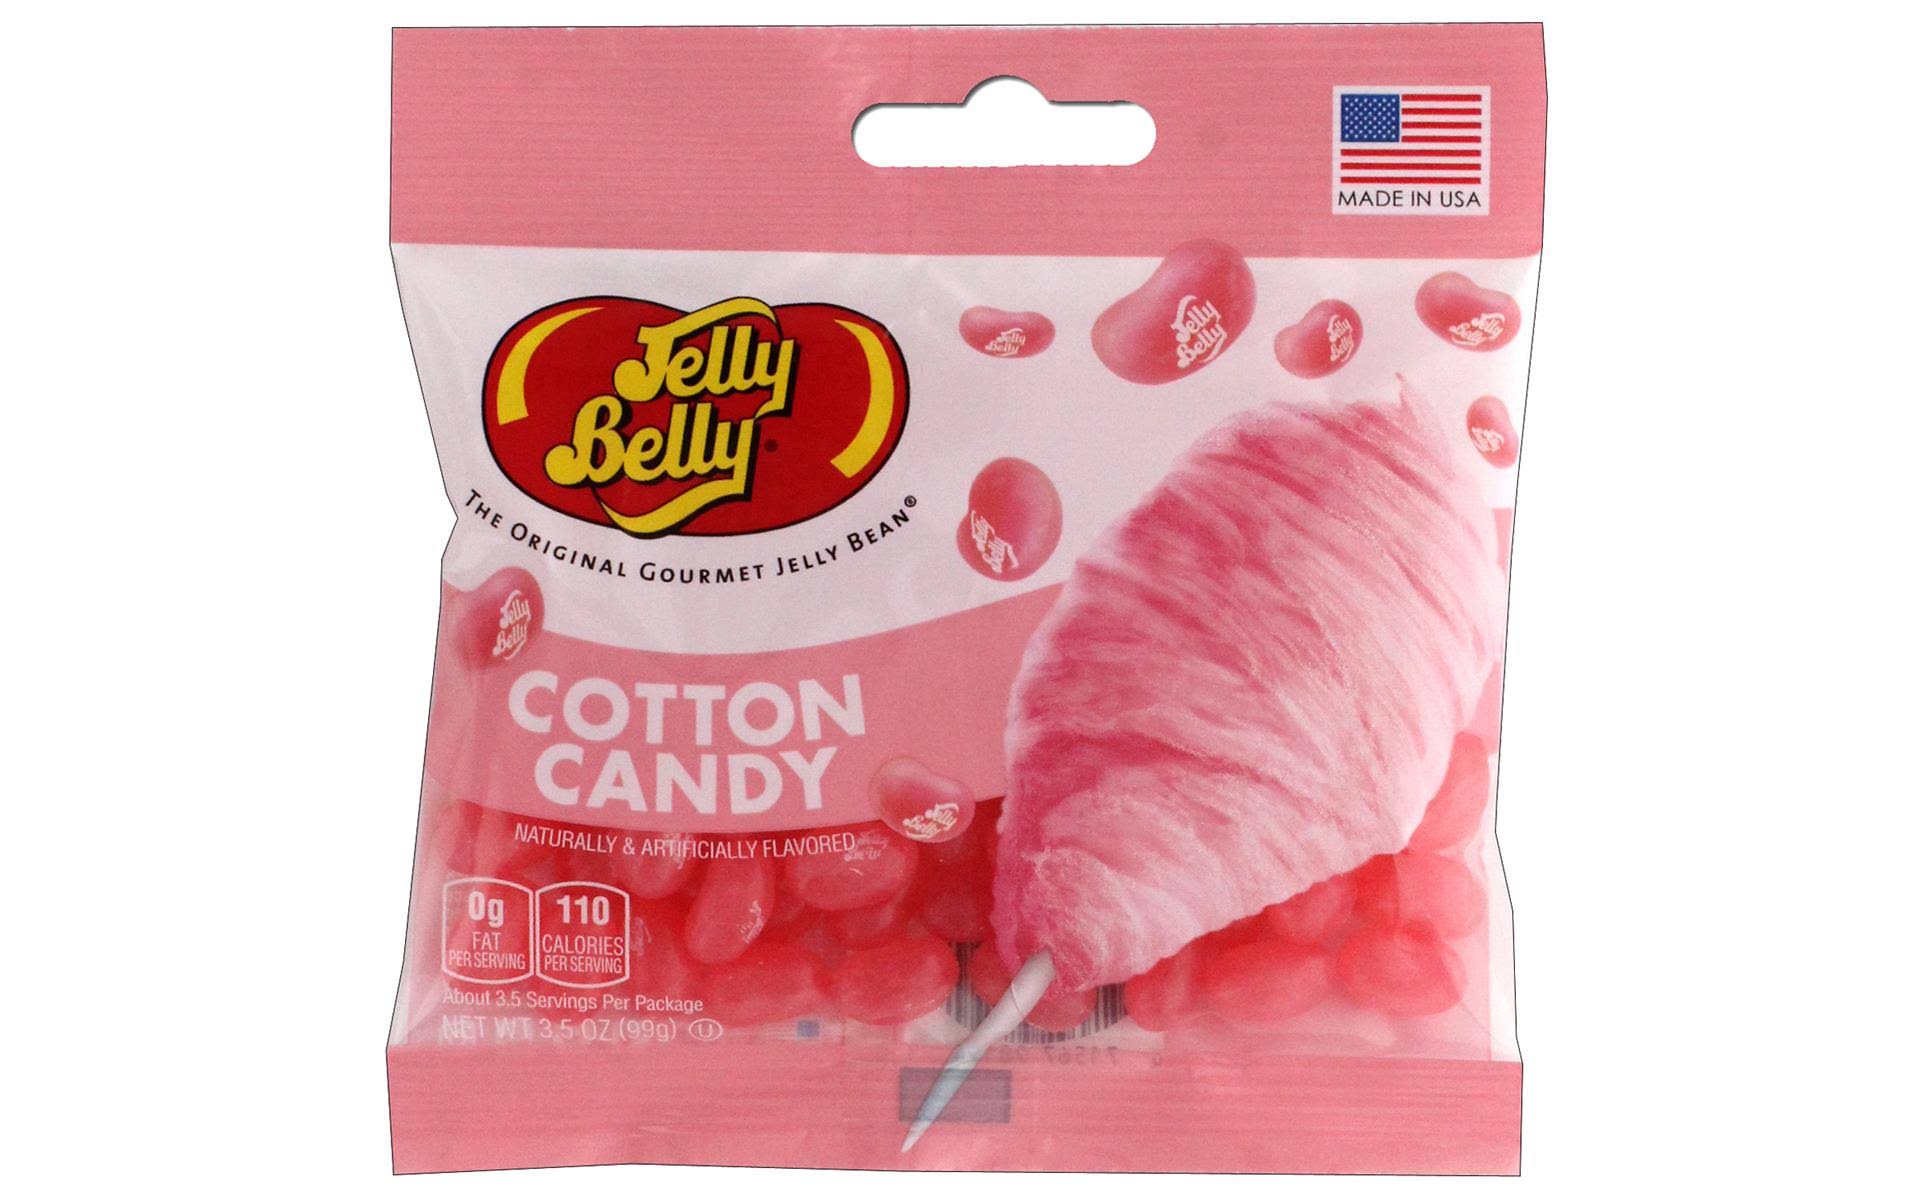 Jelly Belly Cotton Candy The Original Gourmet Jelly Bean - 3.5oz